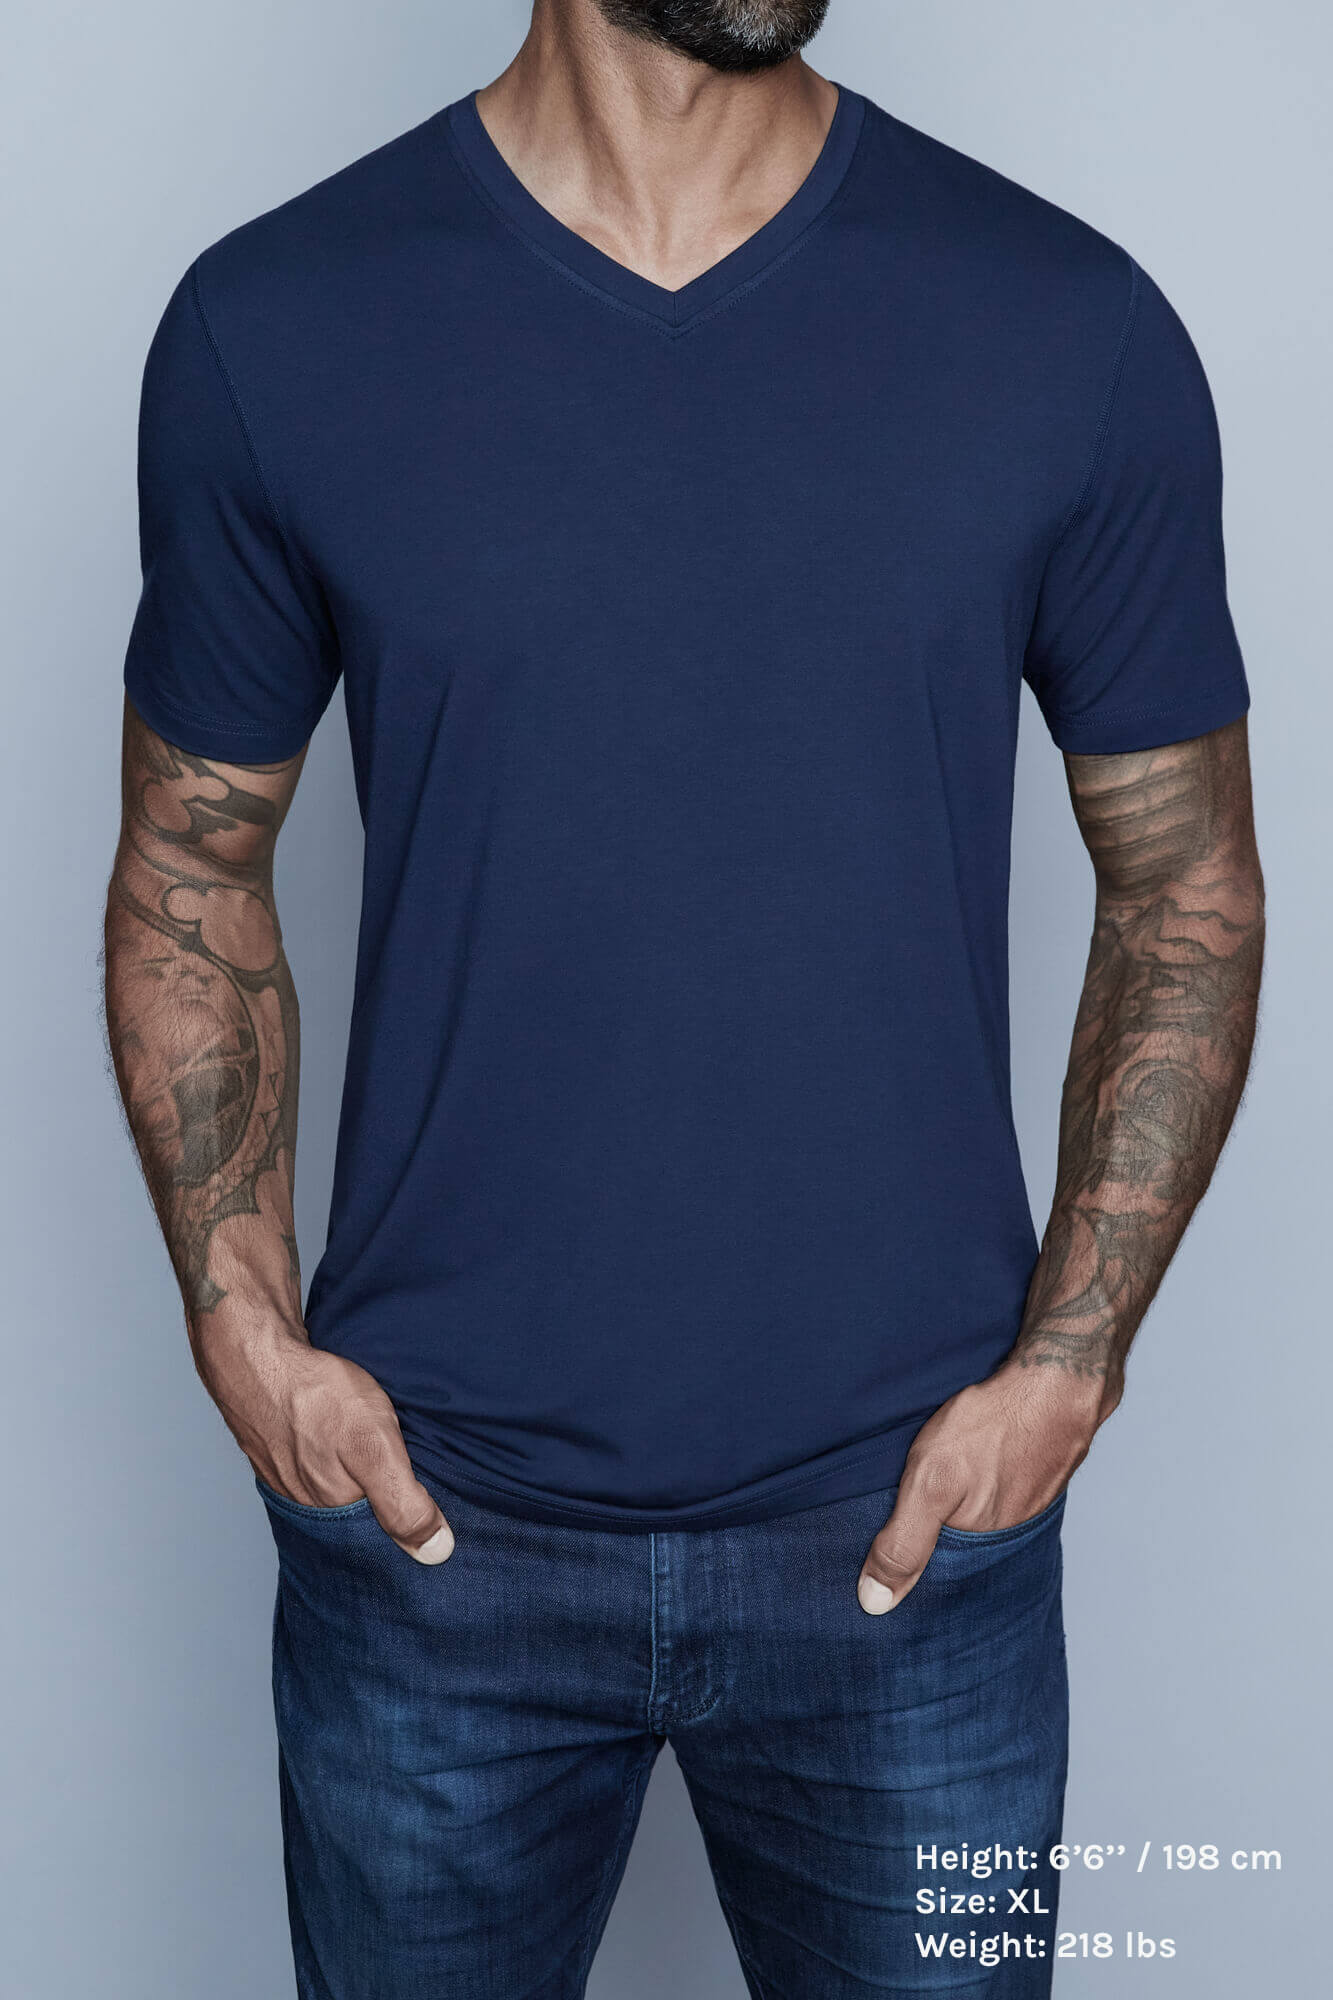 Tall tees in blue for taller men by Navas Lab Apparel.  T shirts for tall guys for everyday use.